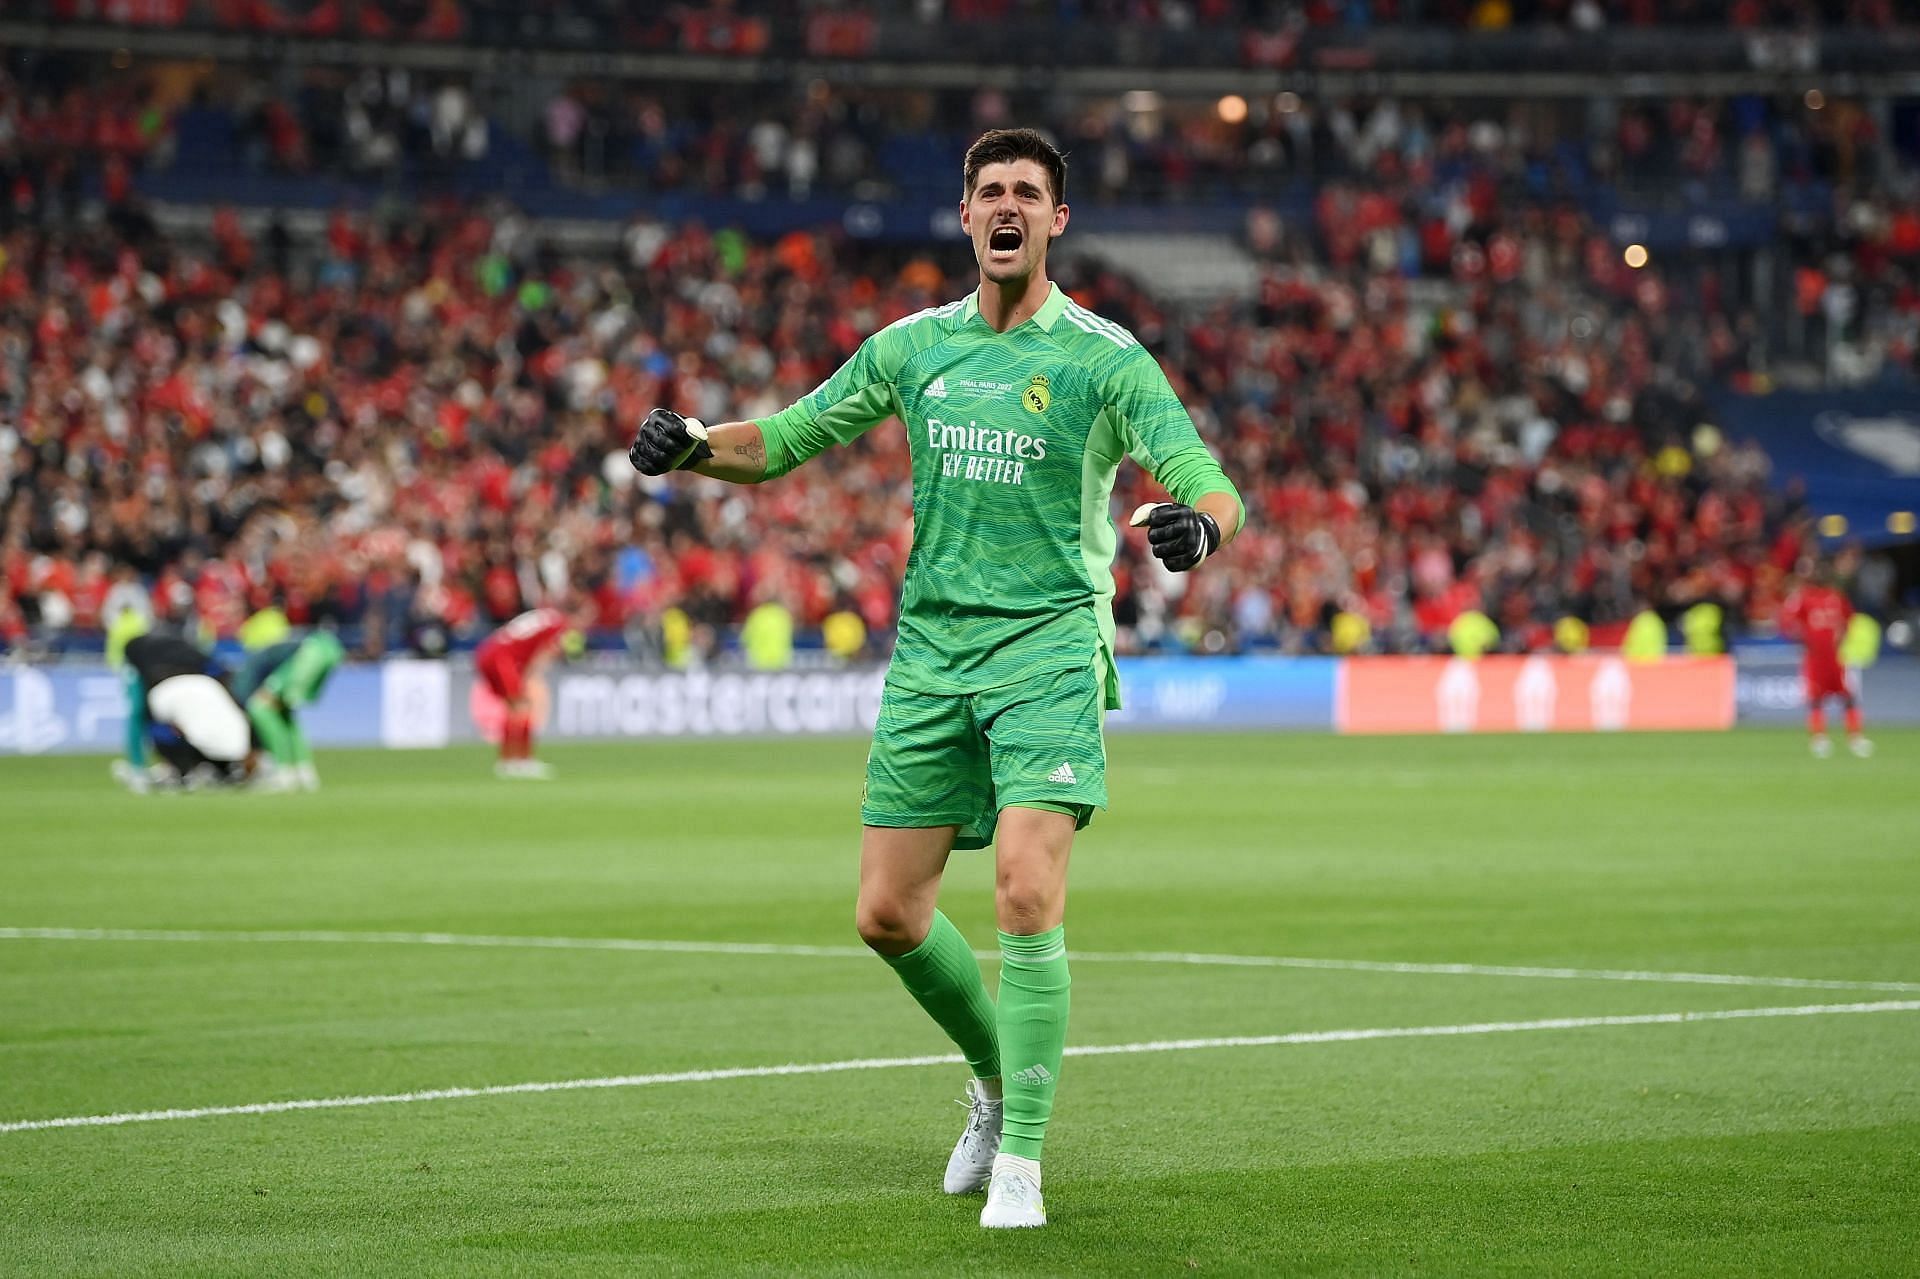 Courtois is currently one of the best goalkeepers in the world